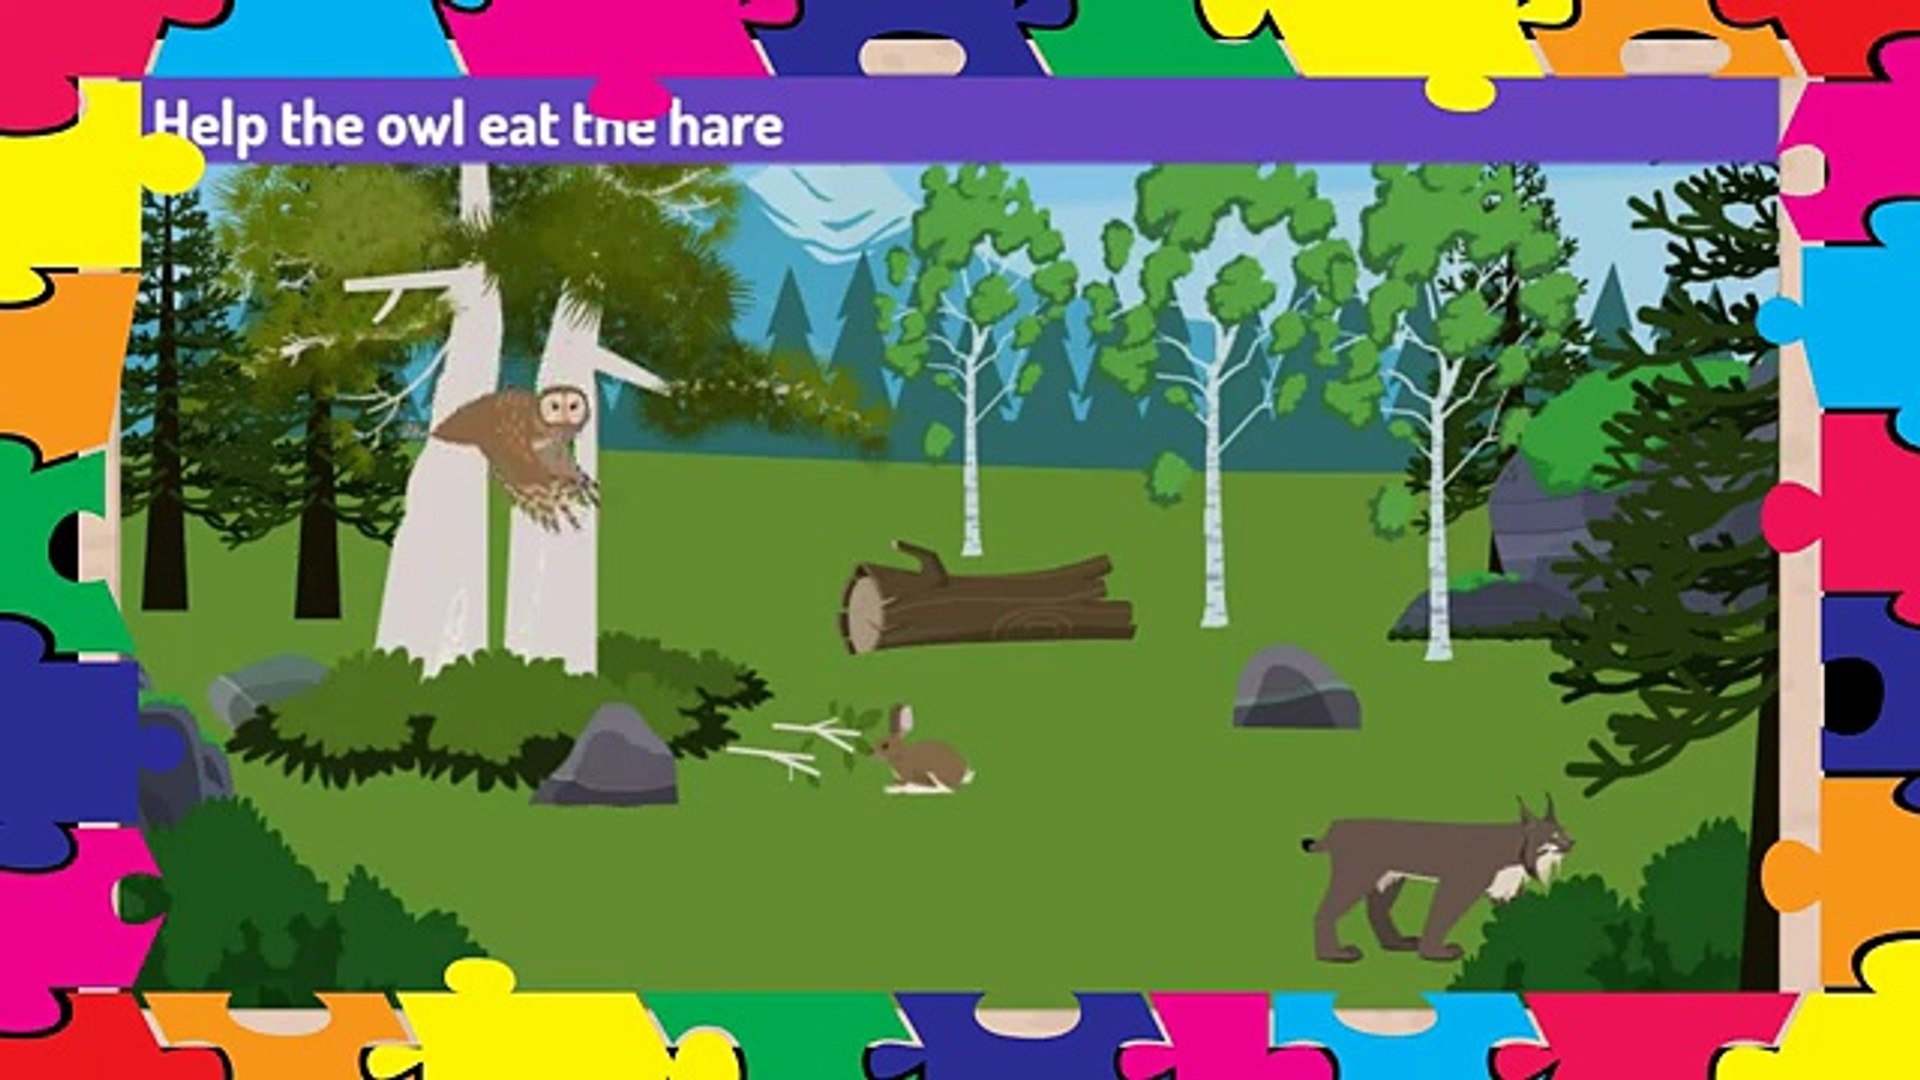 Food Chains and Food Webs. Education video game for kids